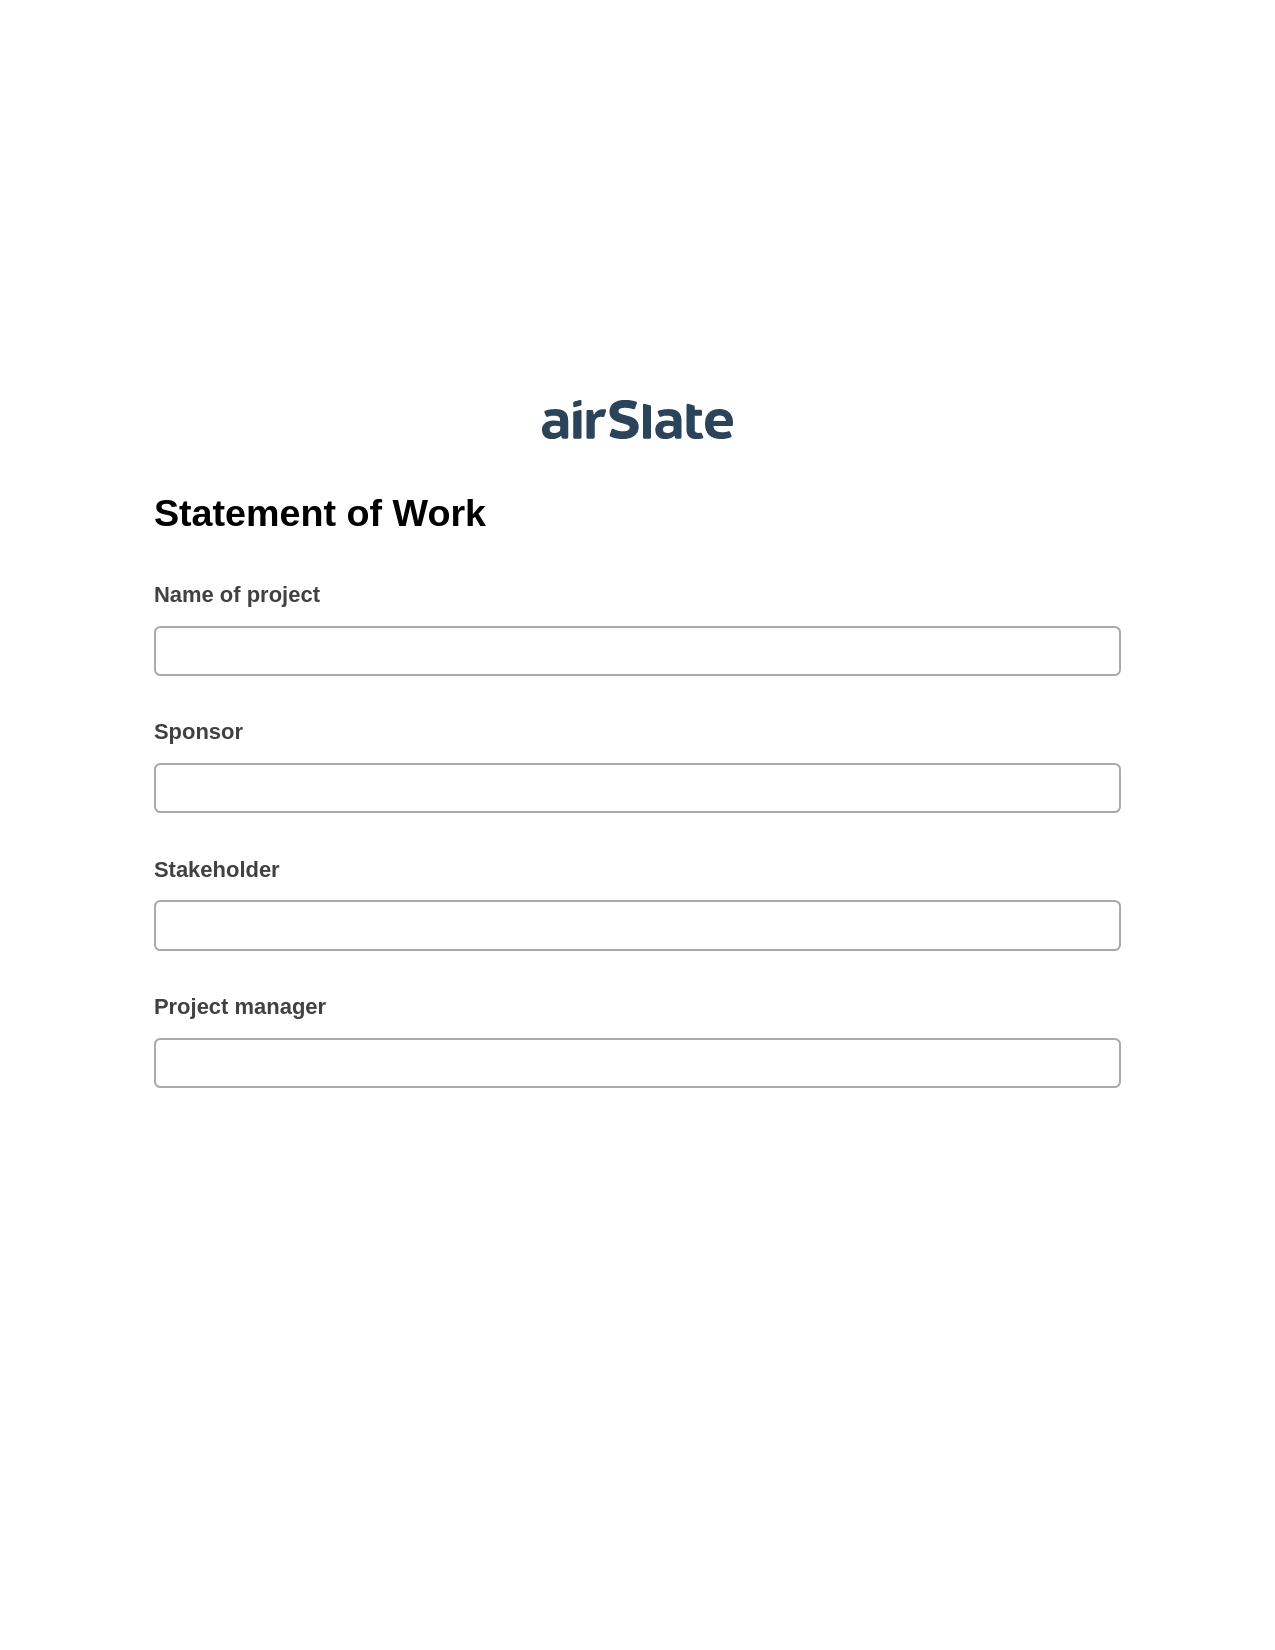 Statement of Work Pre-fill Dropdown from Airtable, Add Tags to Slate Bot, Export to Formstack Documents Bot